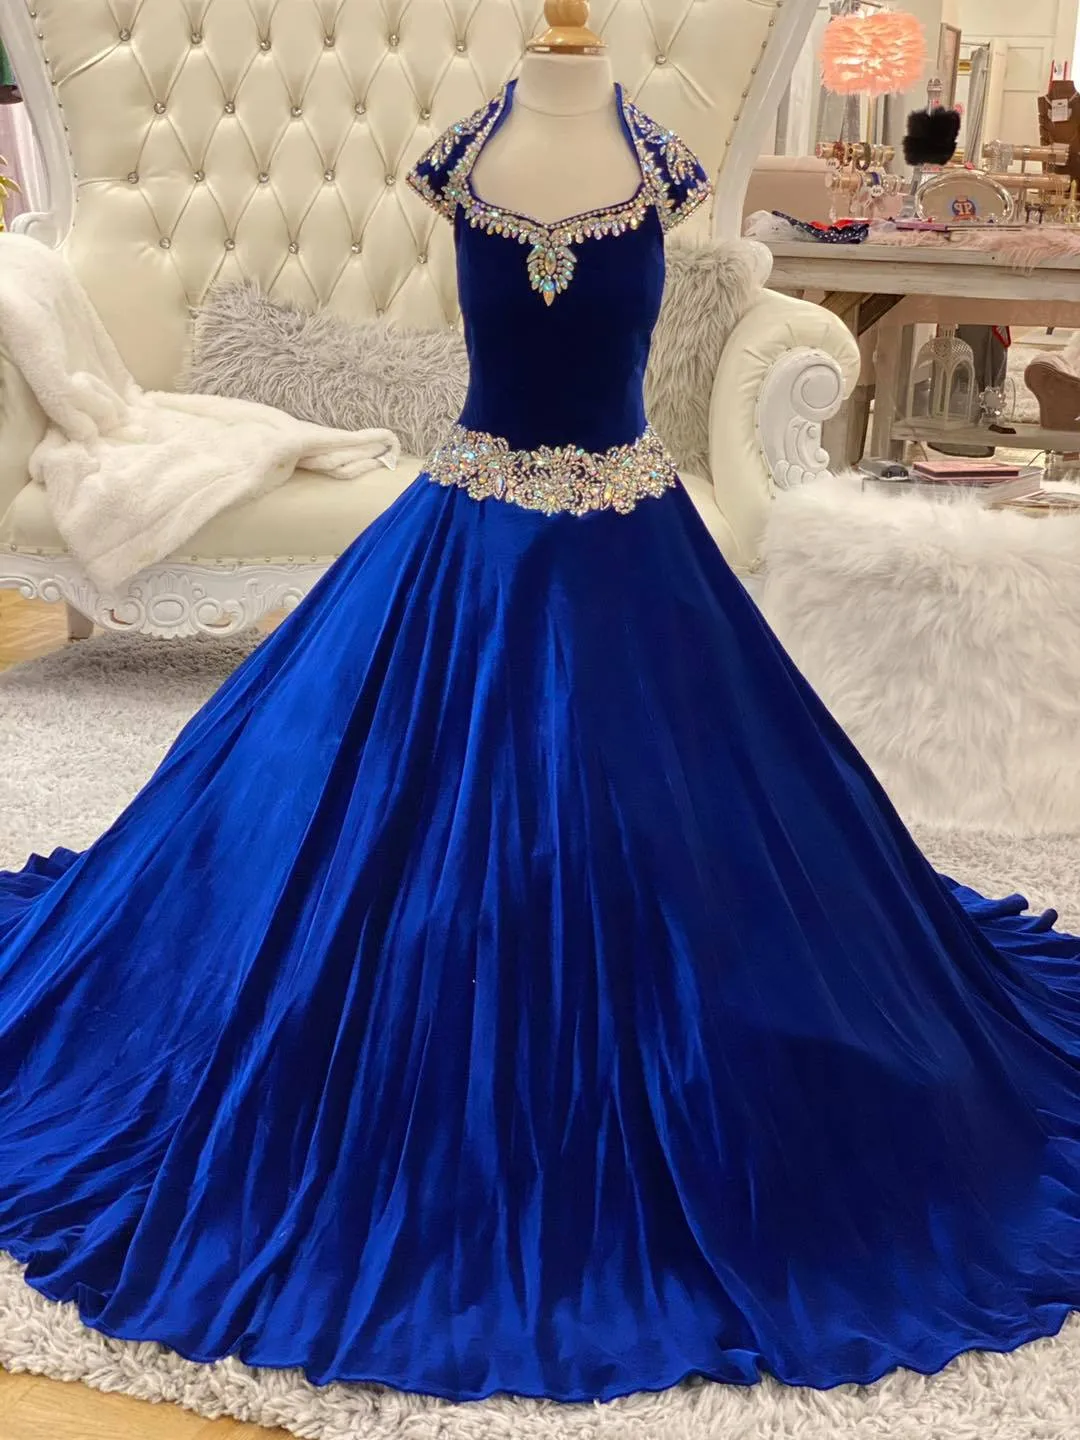 Velvet Royal-Blue Velvet Abiti per bambini Toddlers Teens 2021 Cappuccio Manica Ritzee Roise Ball Gown Lunga Bambina Formale Party Gowns Keyhole Indietro Indietro Cristalli perline